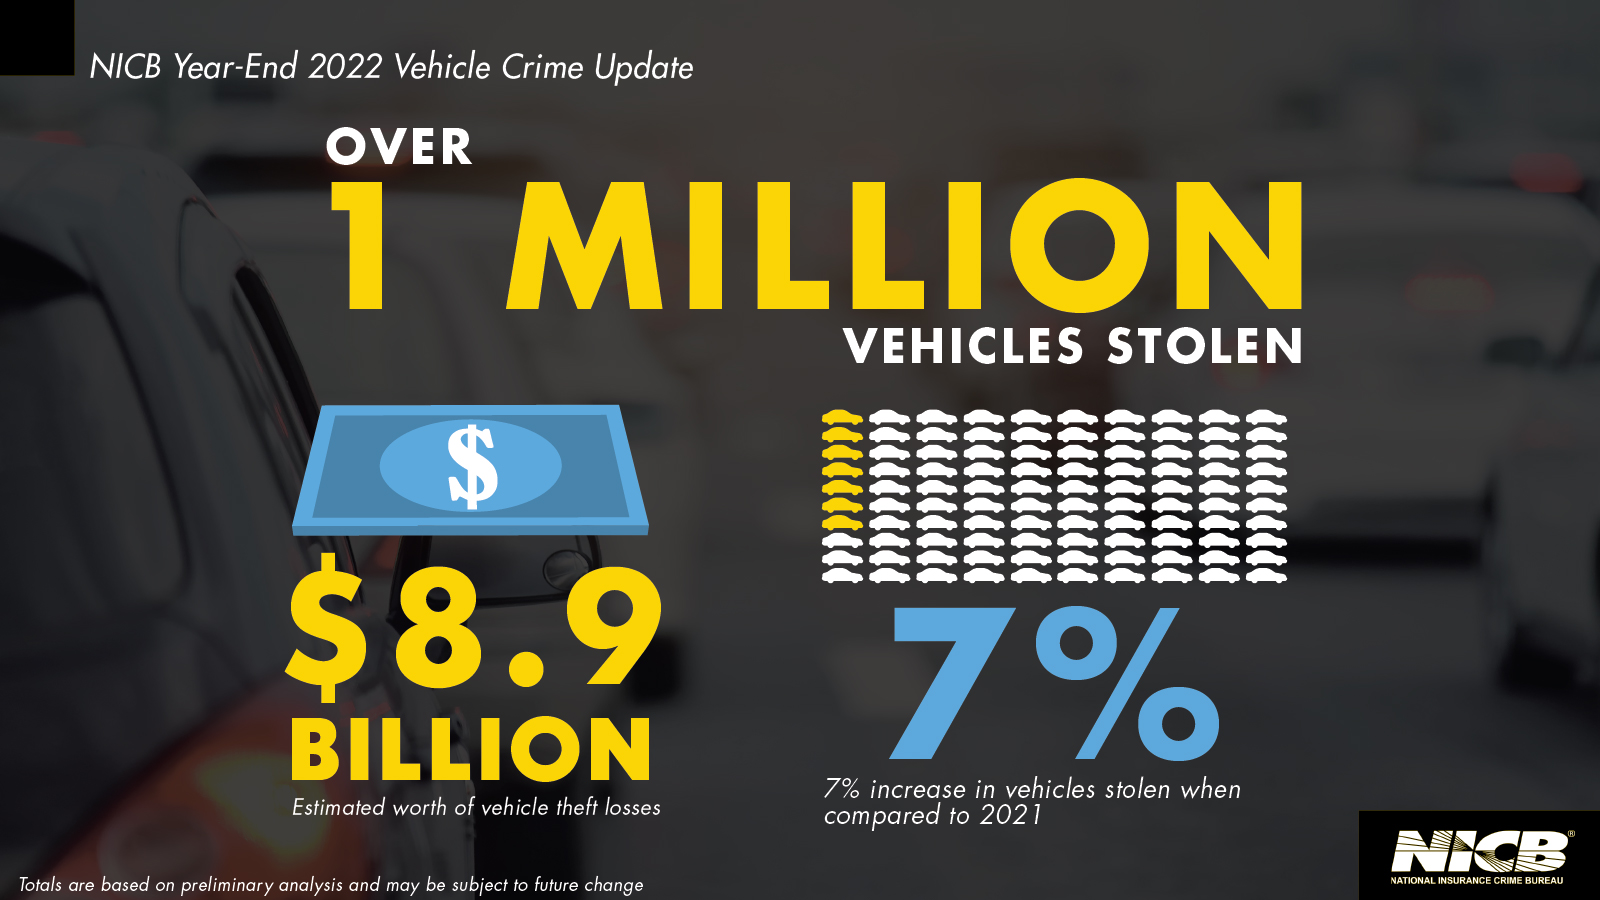 2022 Year-End Vehicle Crime Trends